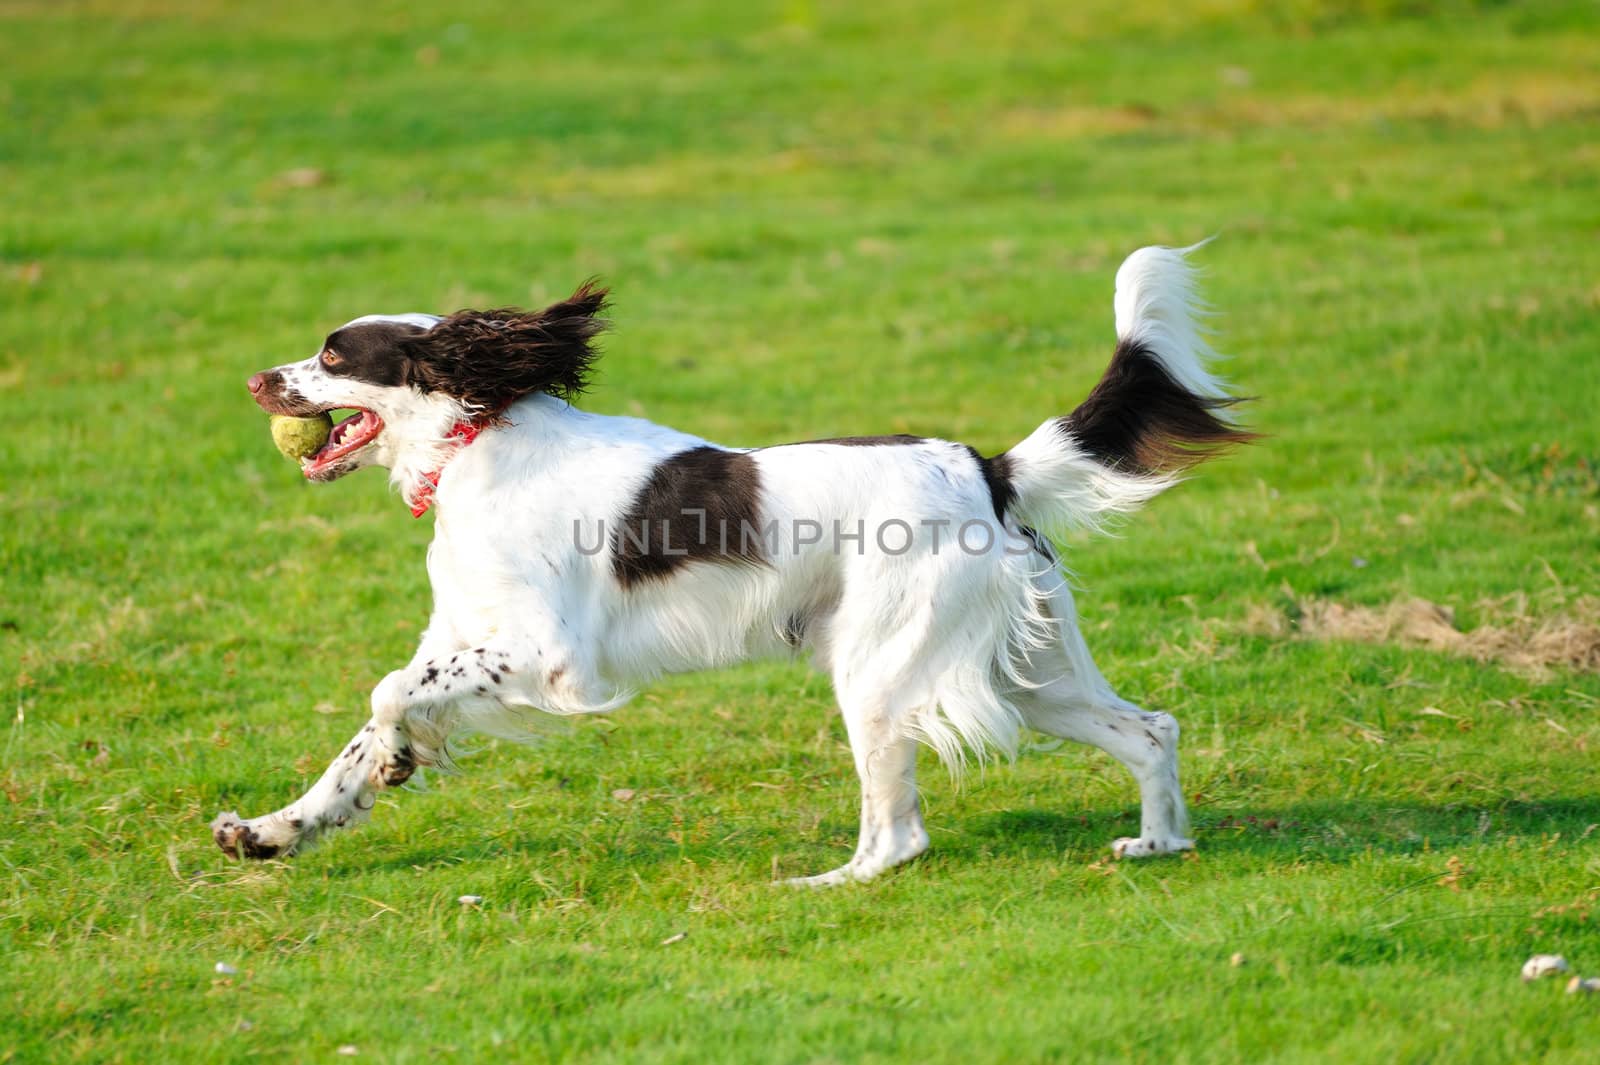 A springer dog running on the lawn